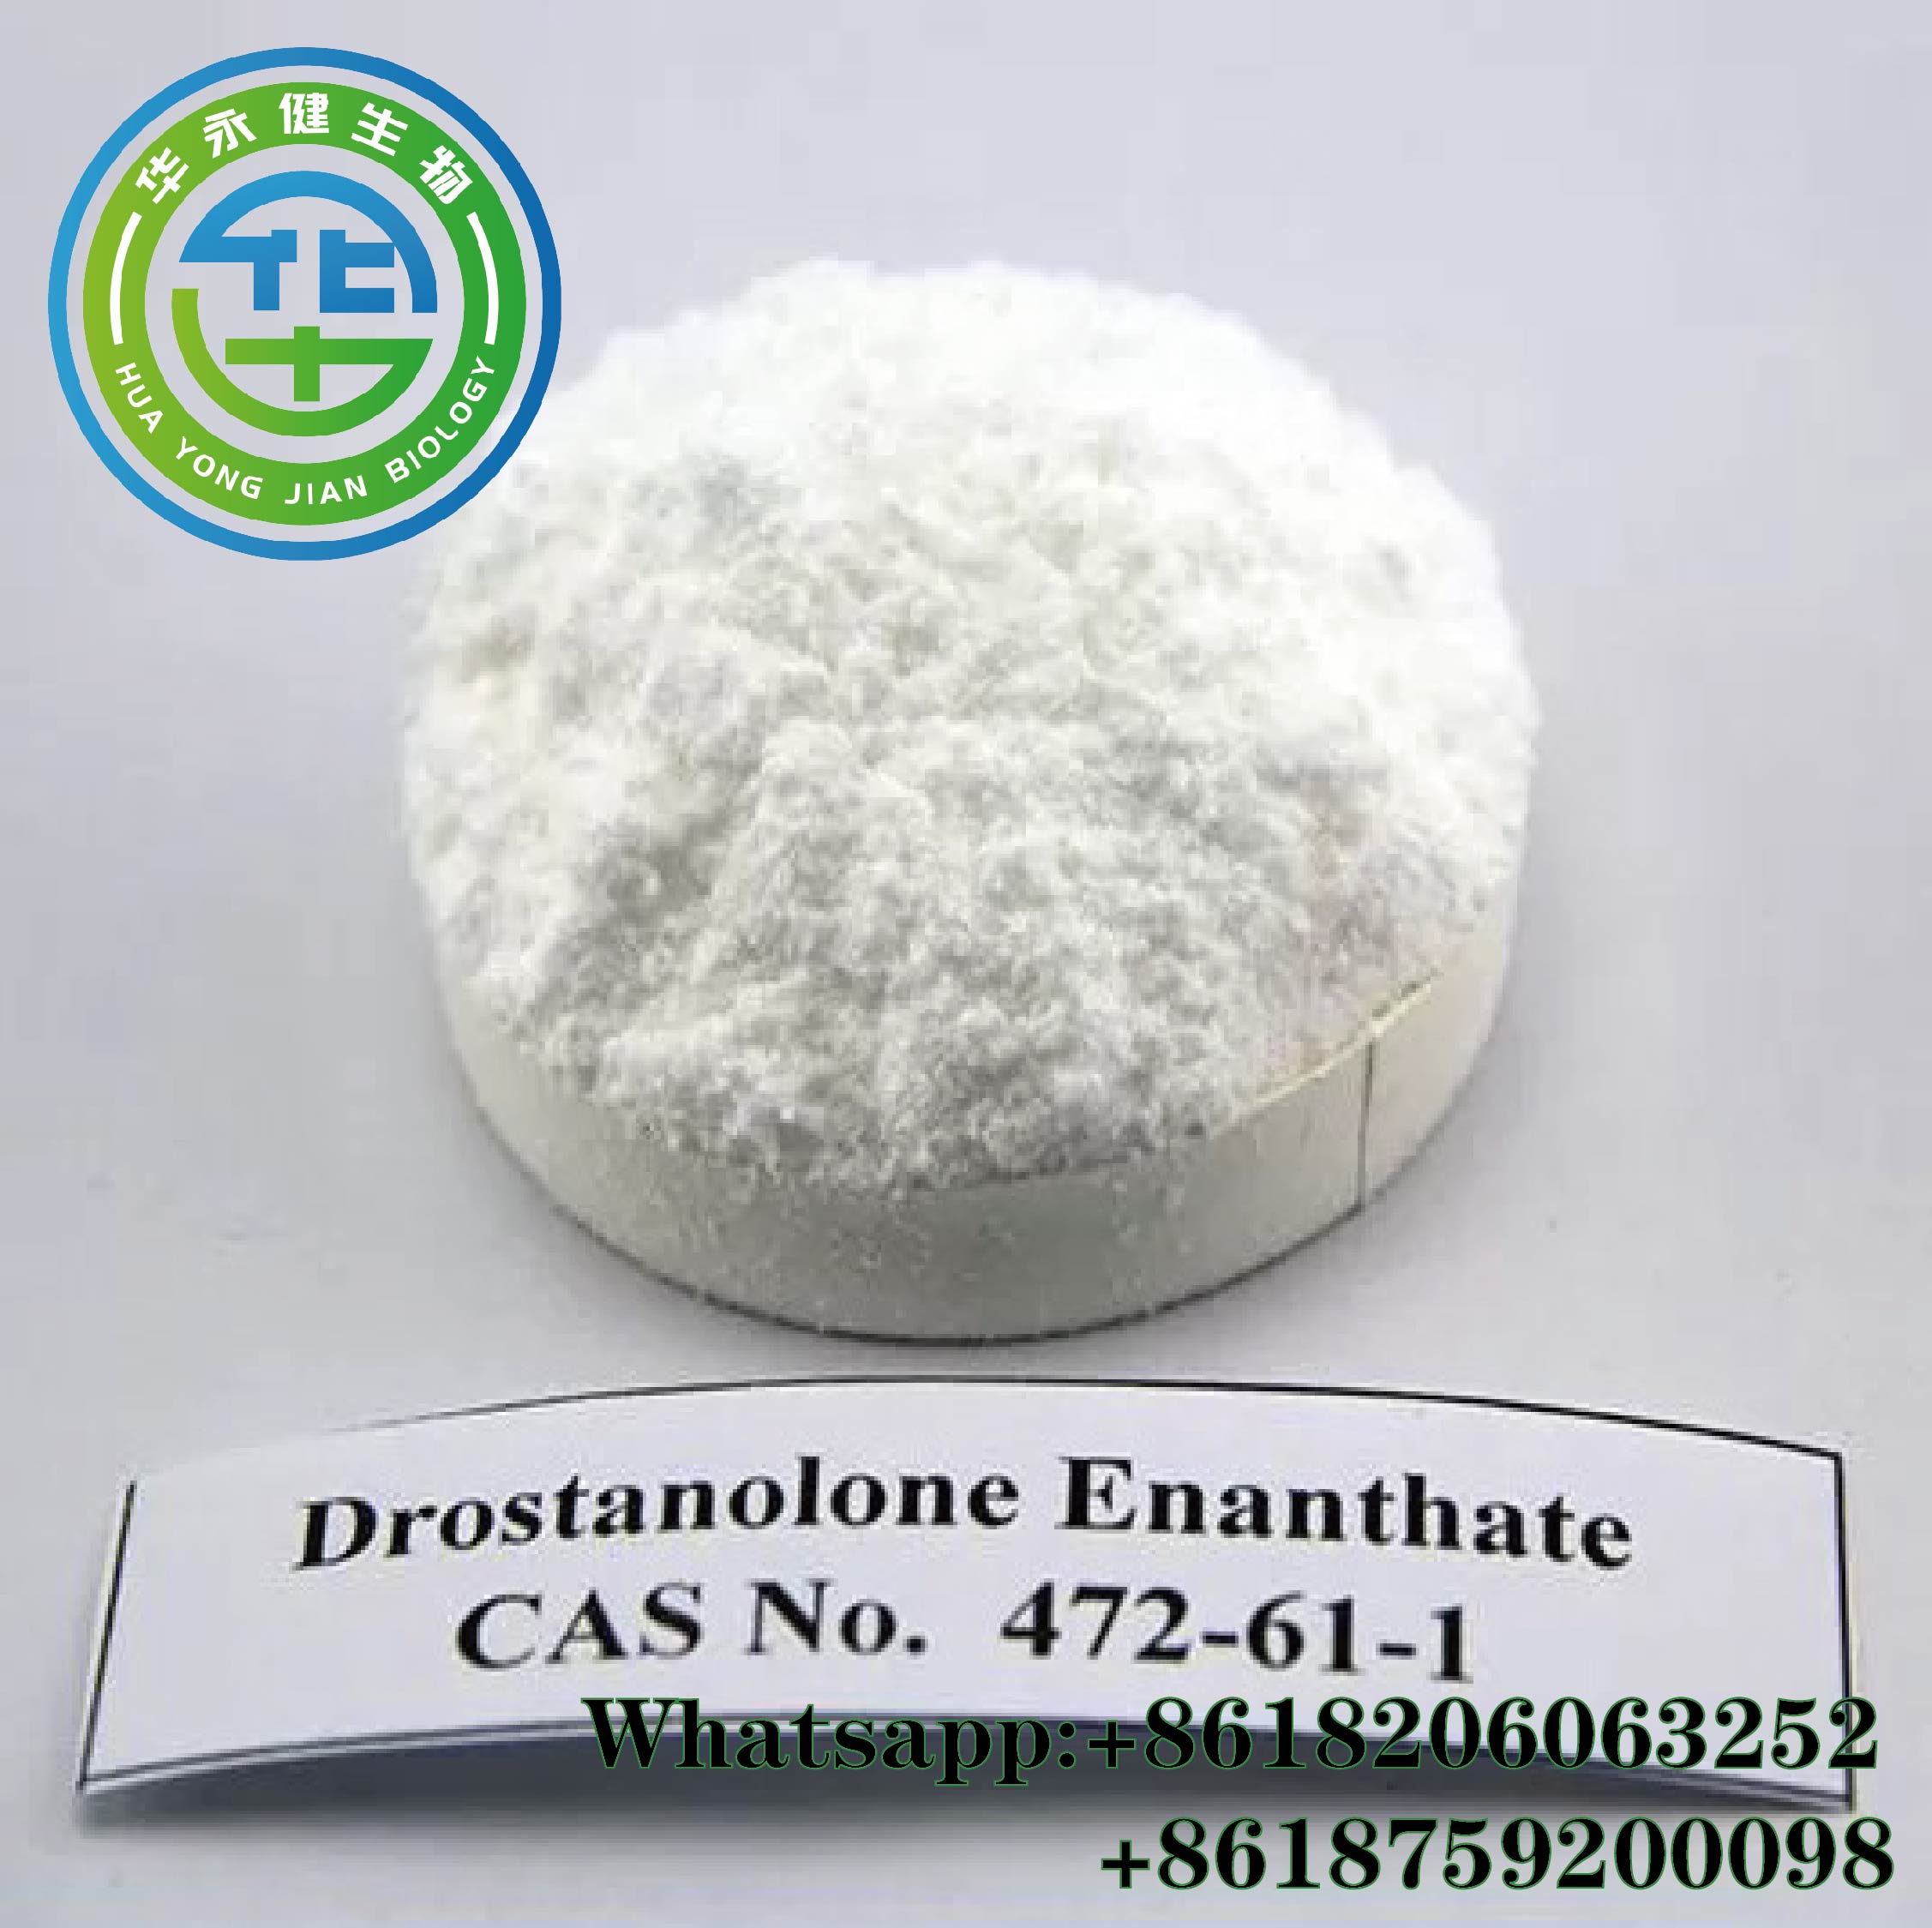 Nature Masteron E Steroid Powder CasNO. 472-61-145 Drostanolone Enanthate For Bodybuilding Muscle Enhance Featured Image